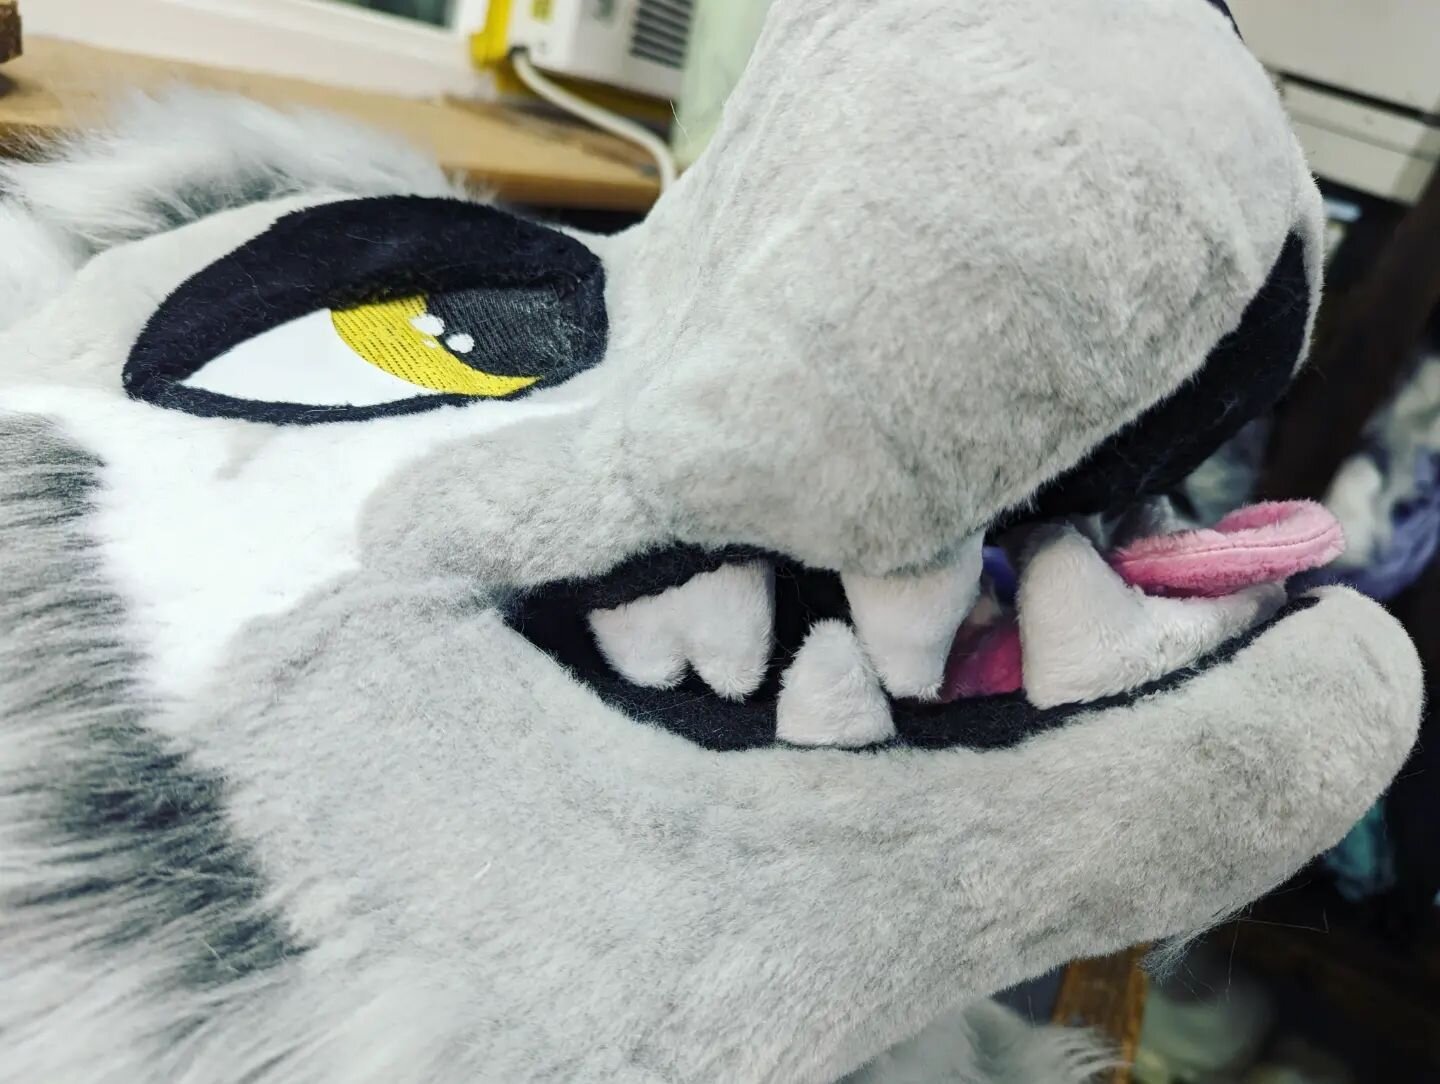 Happy Toothsday! 🦷

(I'll be posting full pics of this head tomorrow, I'm really happy with how it turned out!)

#furryfandom #furry #fursuitmaker #fursuitmaking #furryphoto #fursuitmakers #fursuitpartial #fursuit #fursuitersofinstagram #fursuitfrid